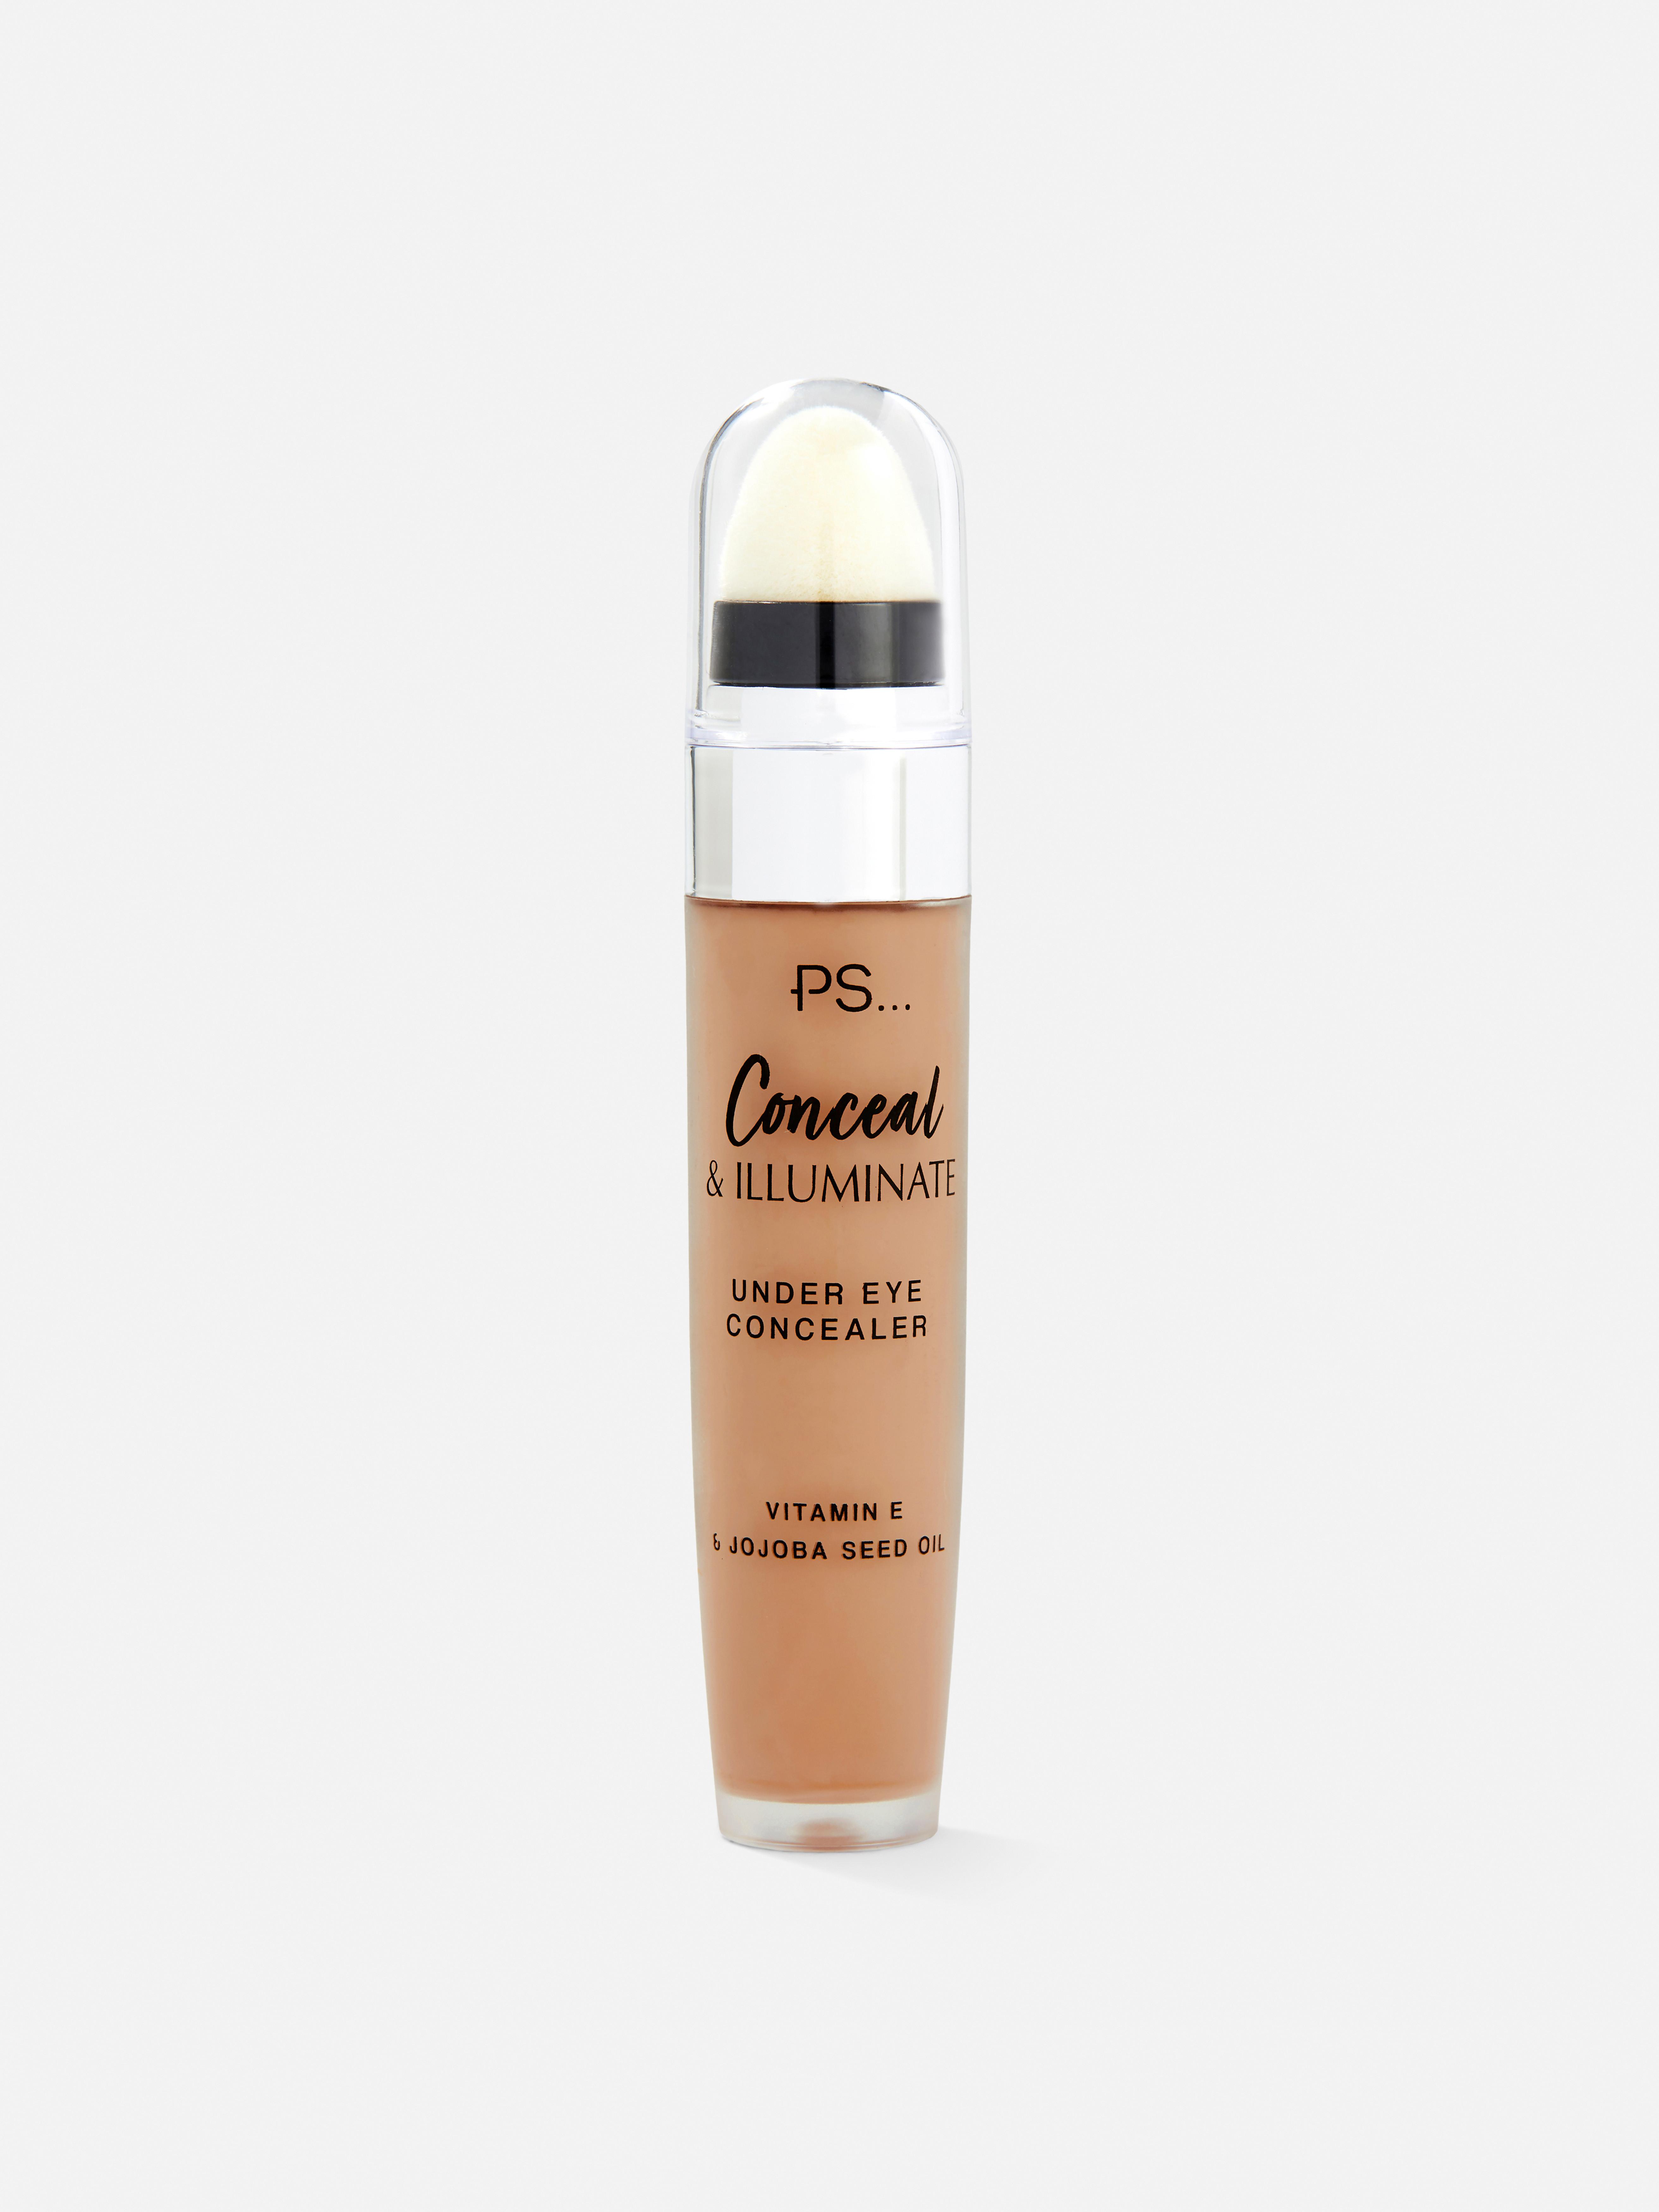 PS… Conceal and Illuminate Under Eye Concealer